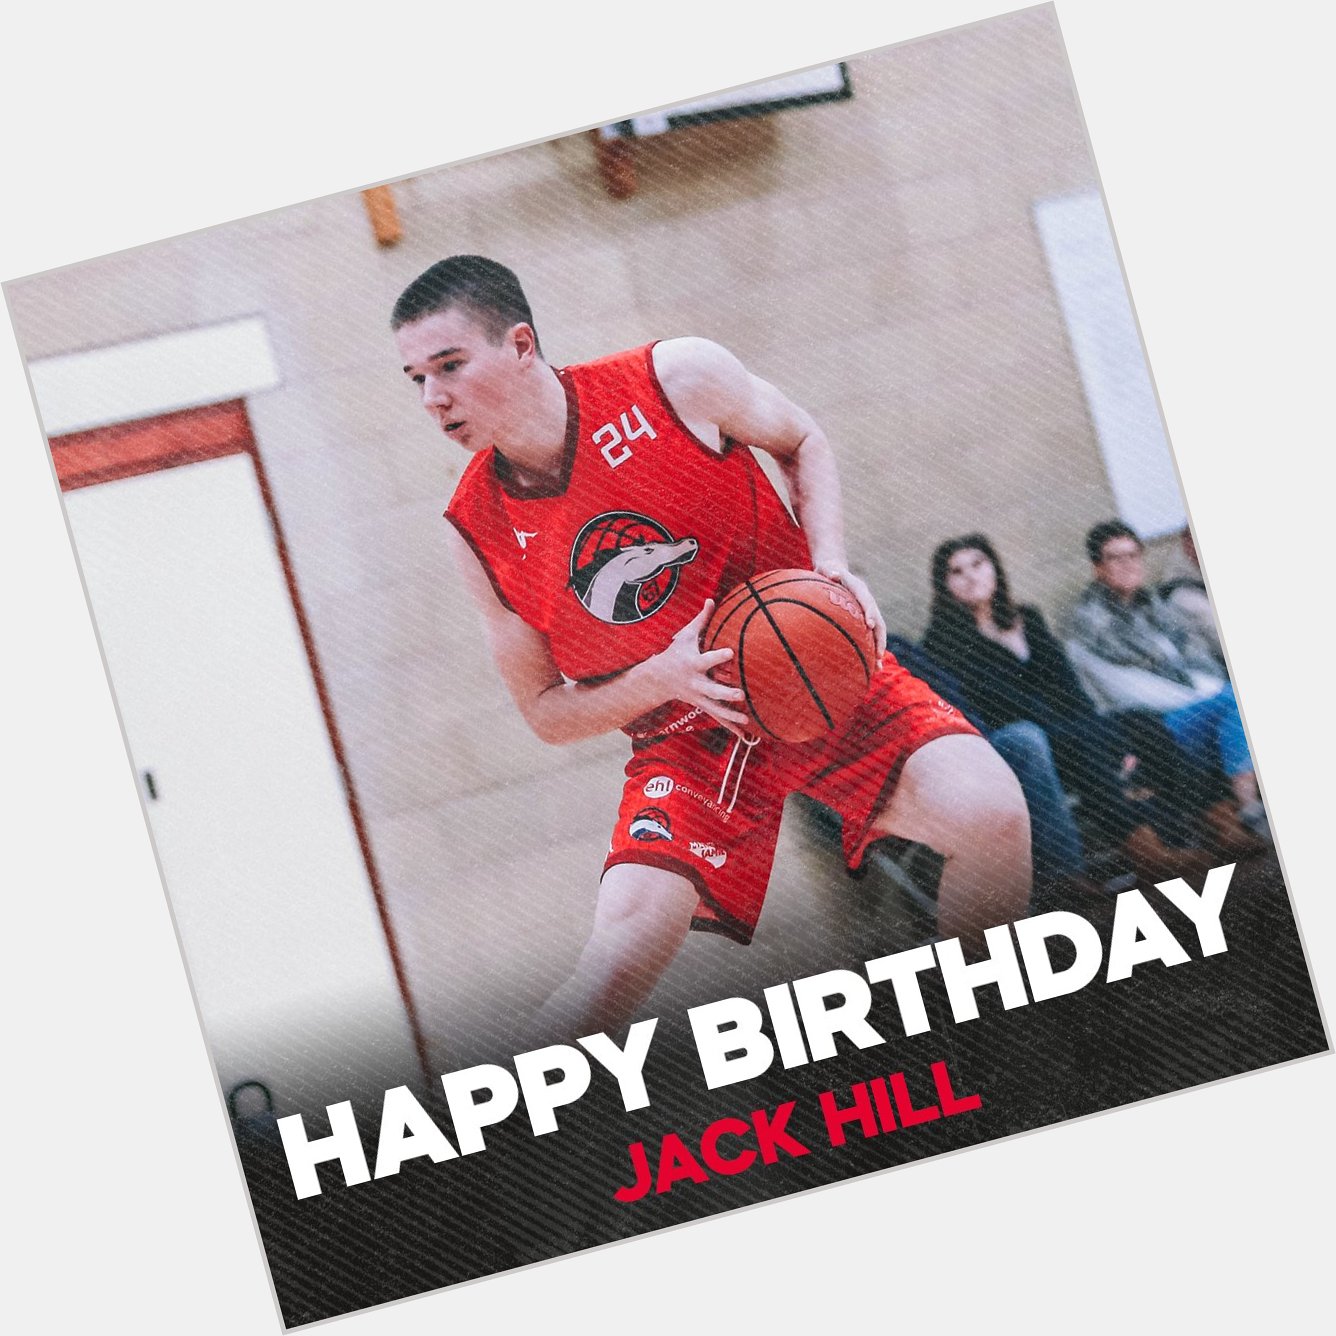 Happy Birthday Jack Hill   We hope you have a great day! 